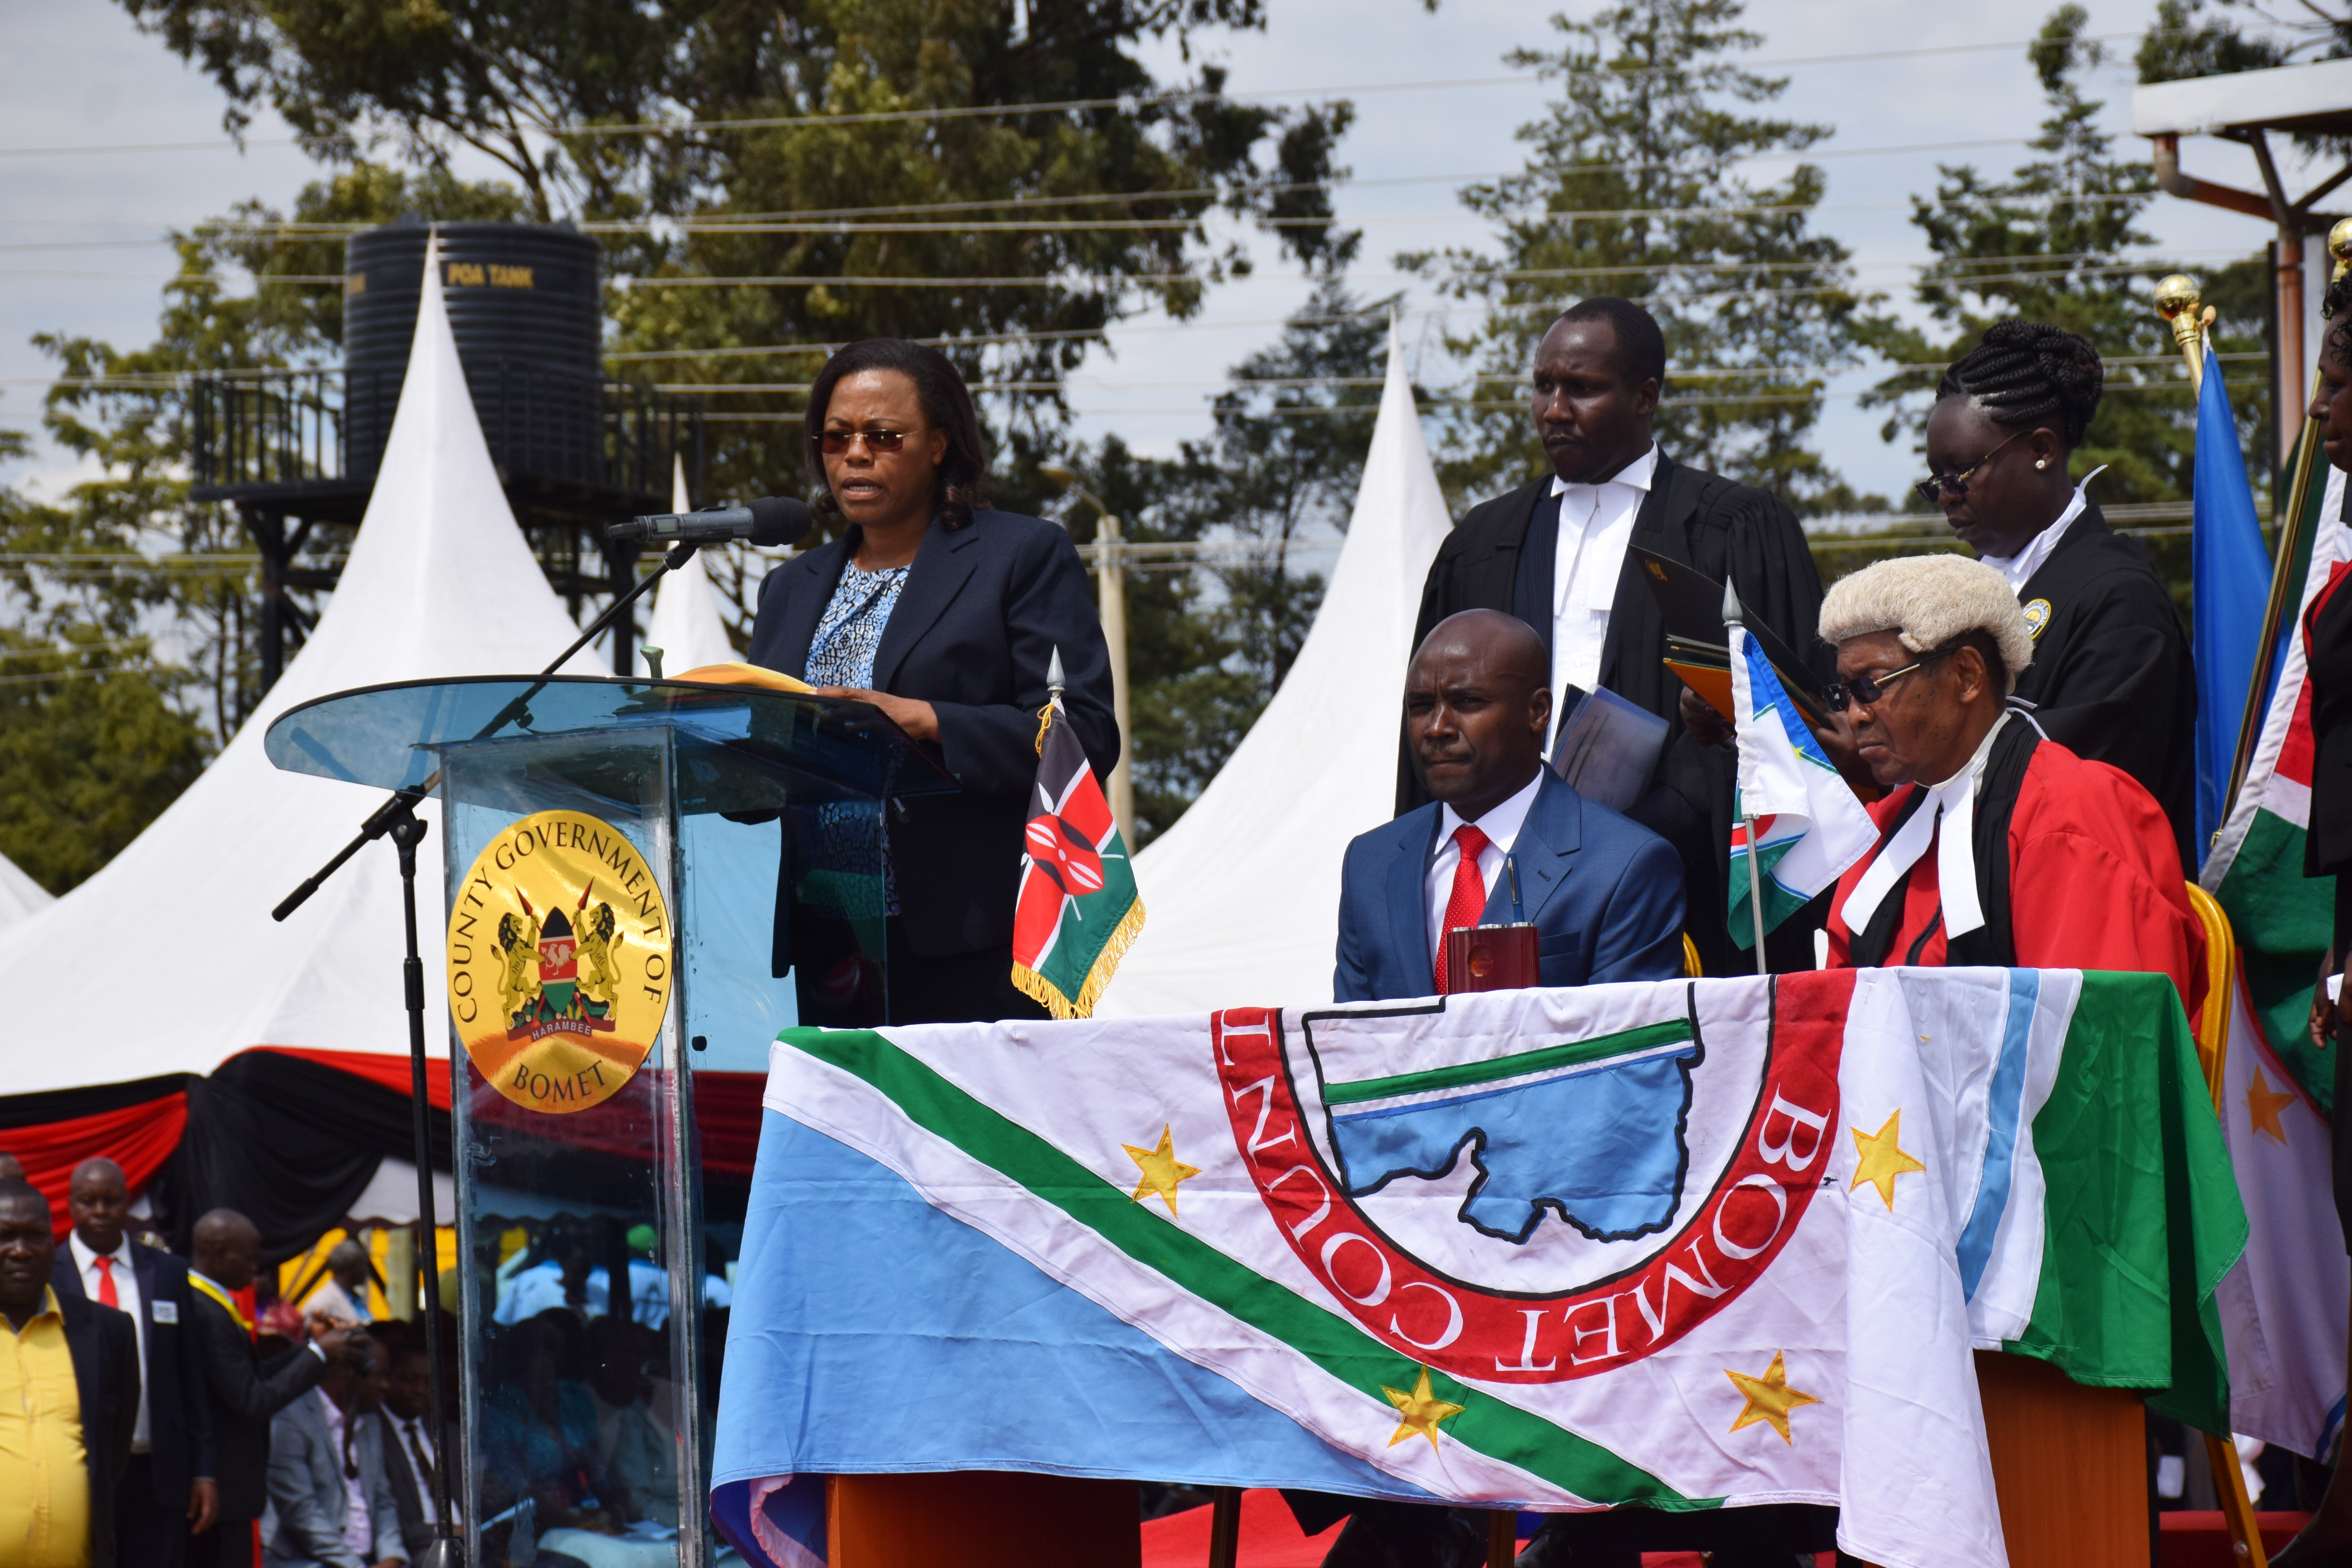 Bomet Governor Commits to Leadership and Integrity Code